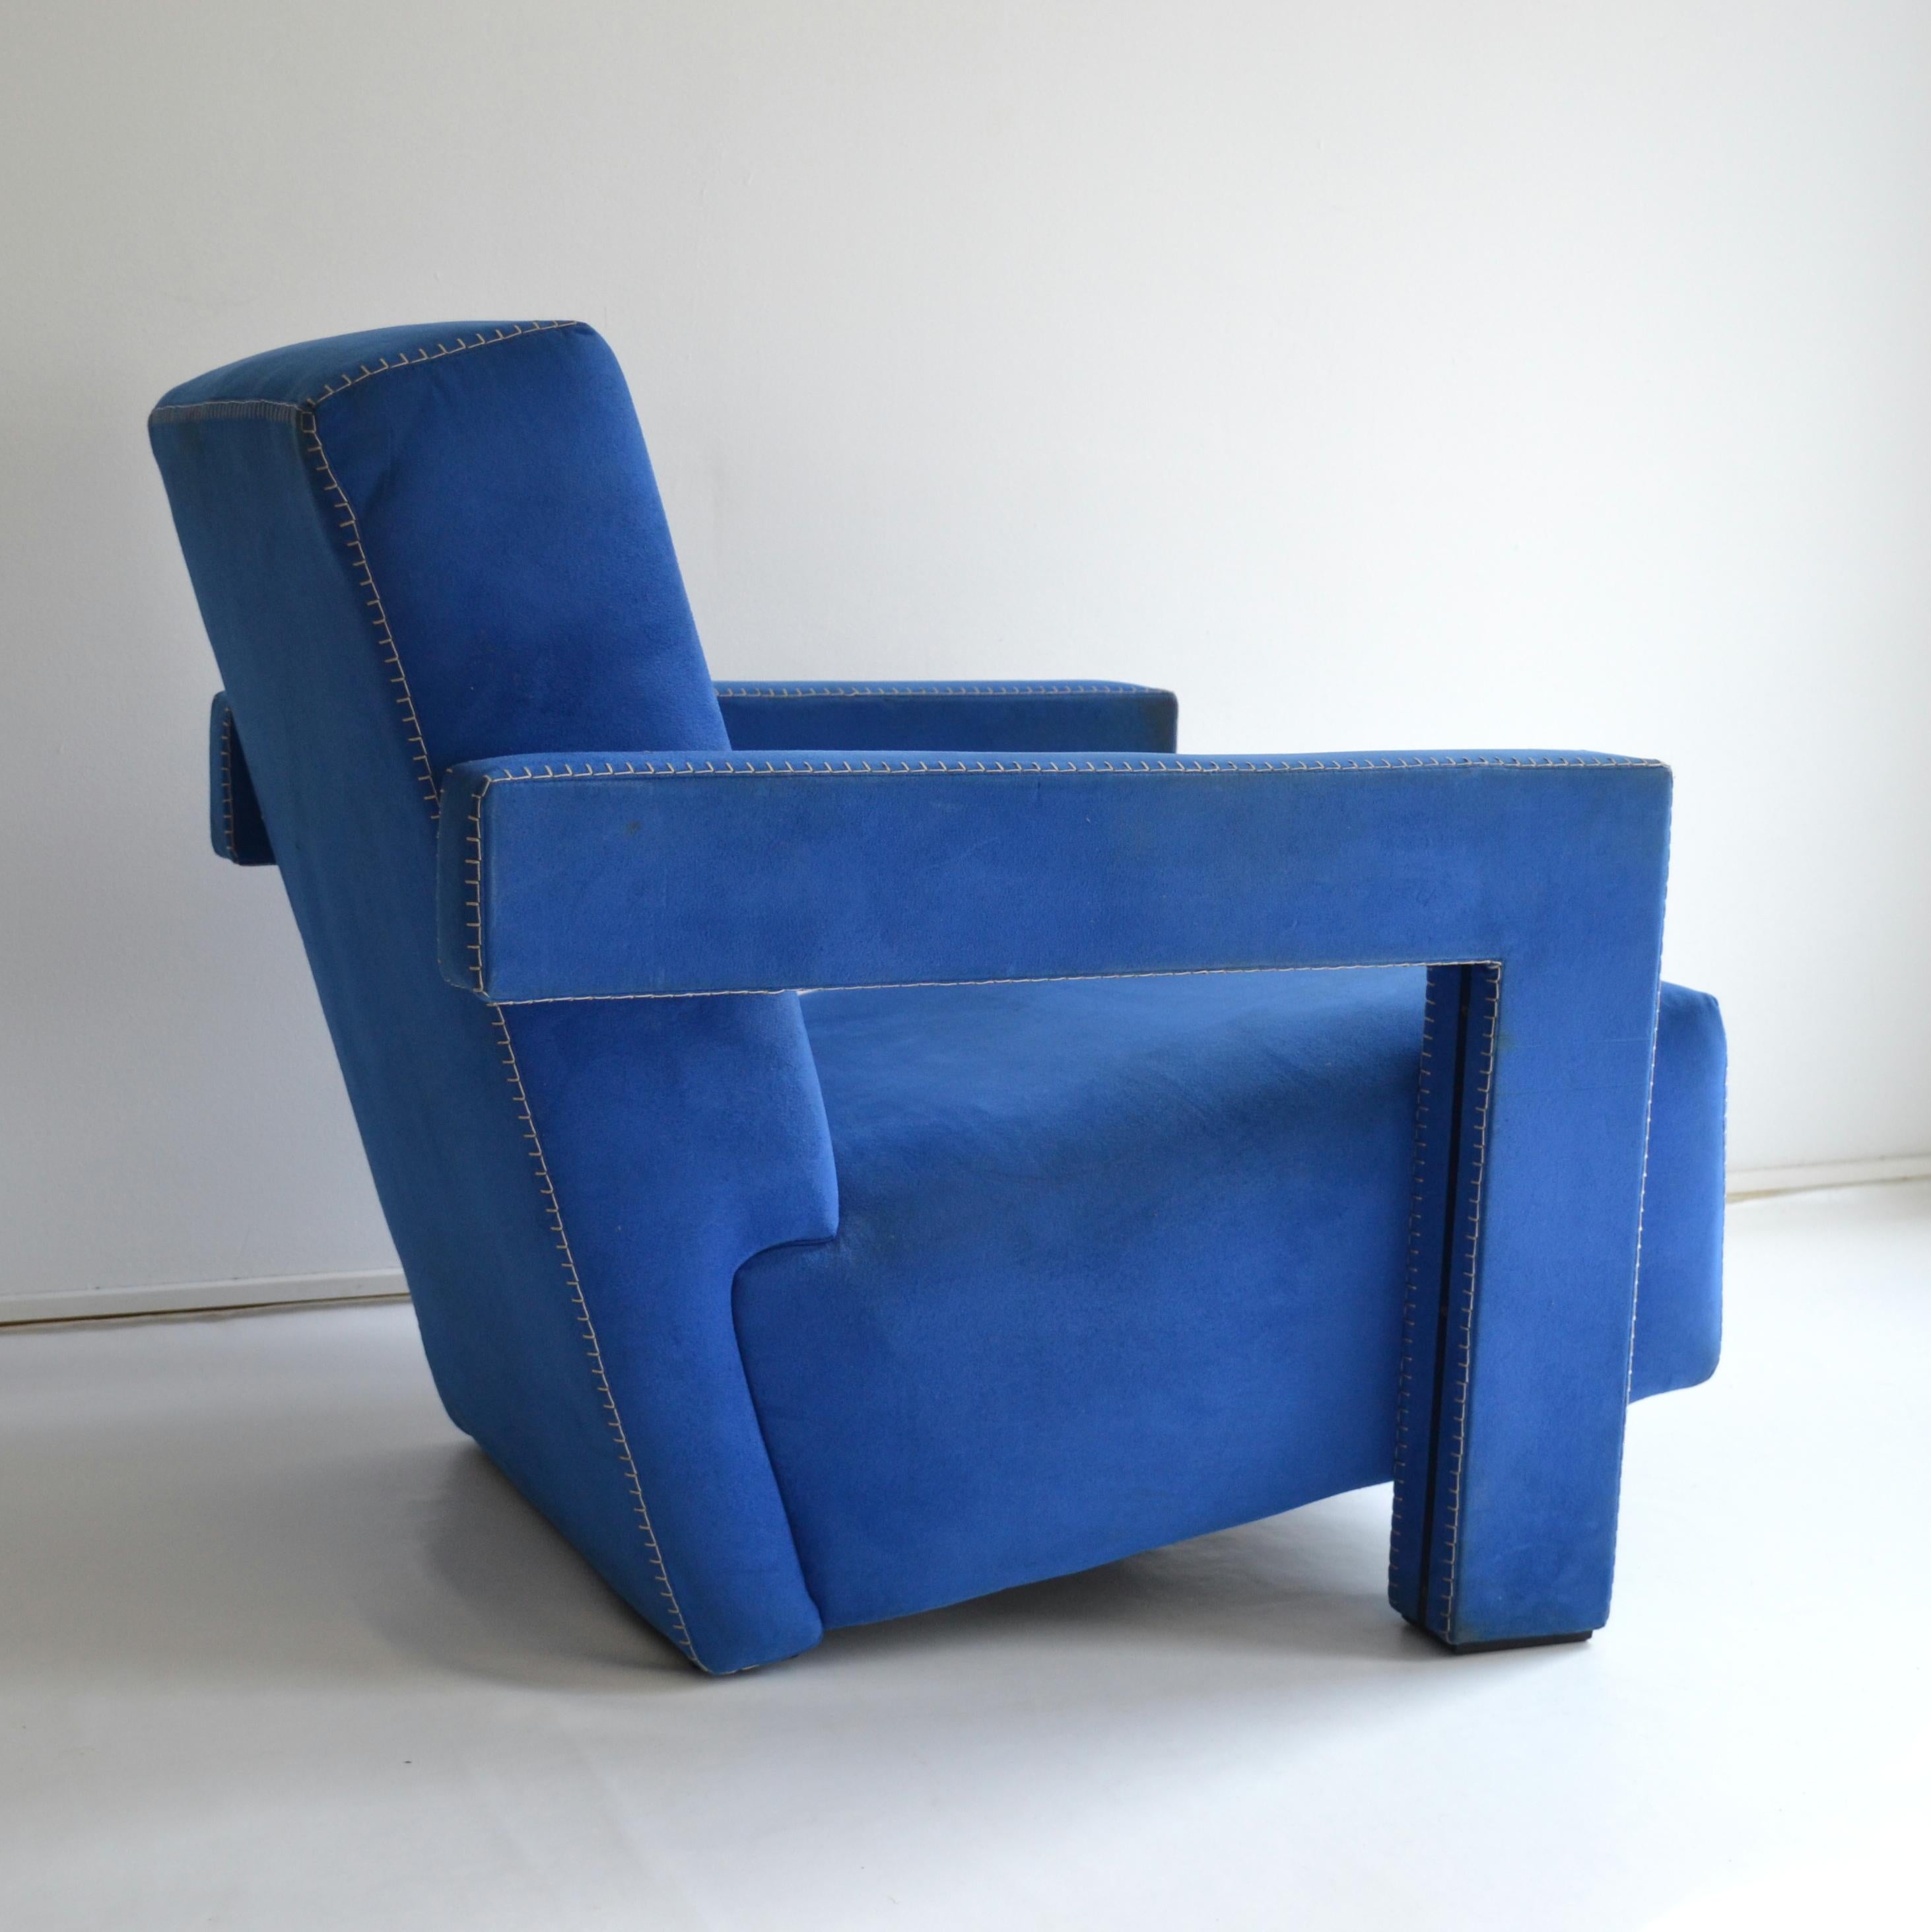 Late 20th Century Blue 'Utrecht' Chair by Dutch Gerrit Rietveld for Cassina 1980s Italy